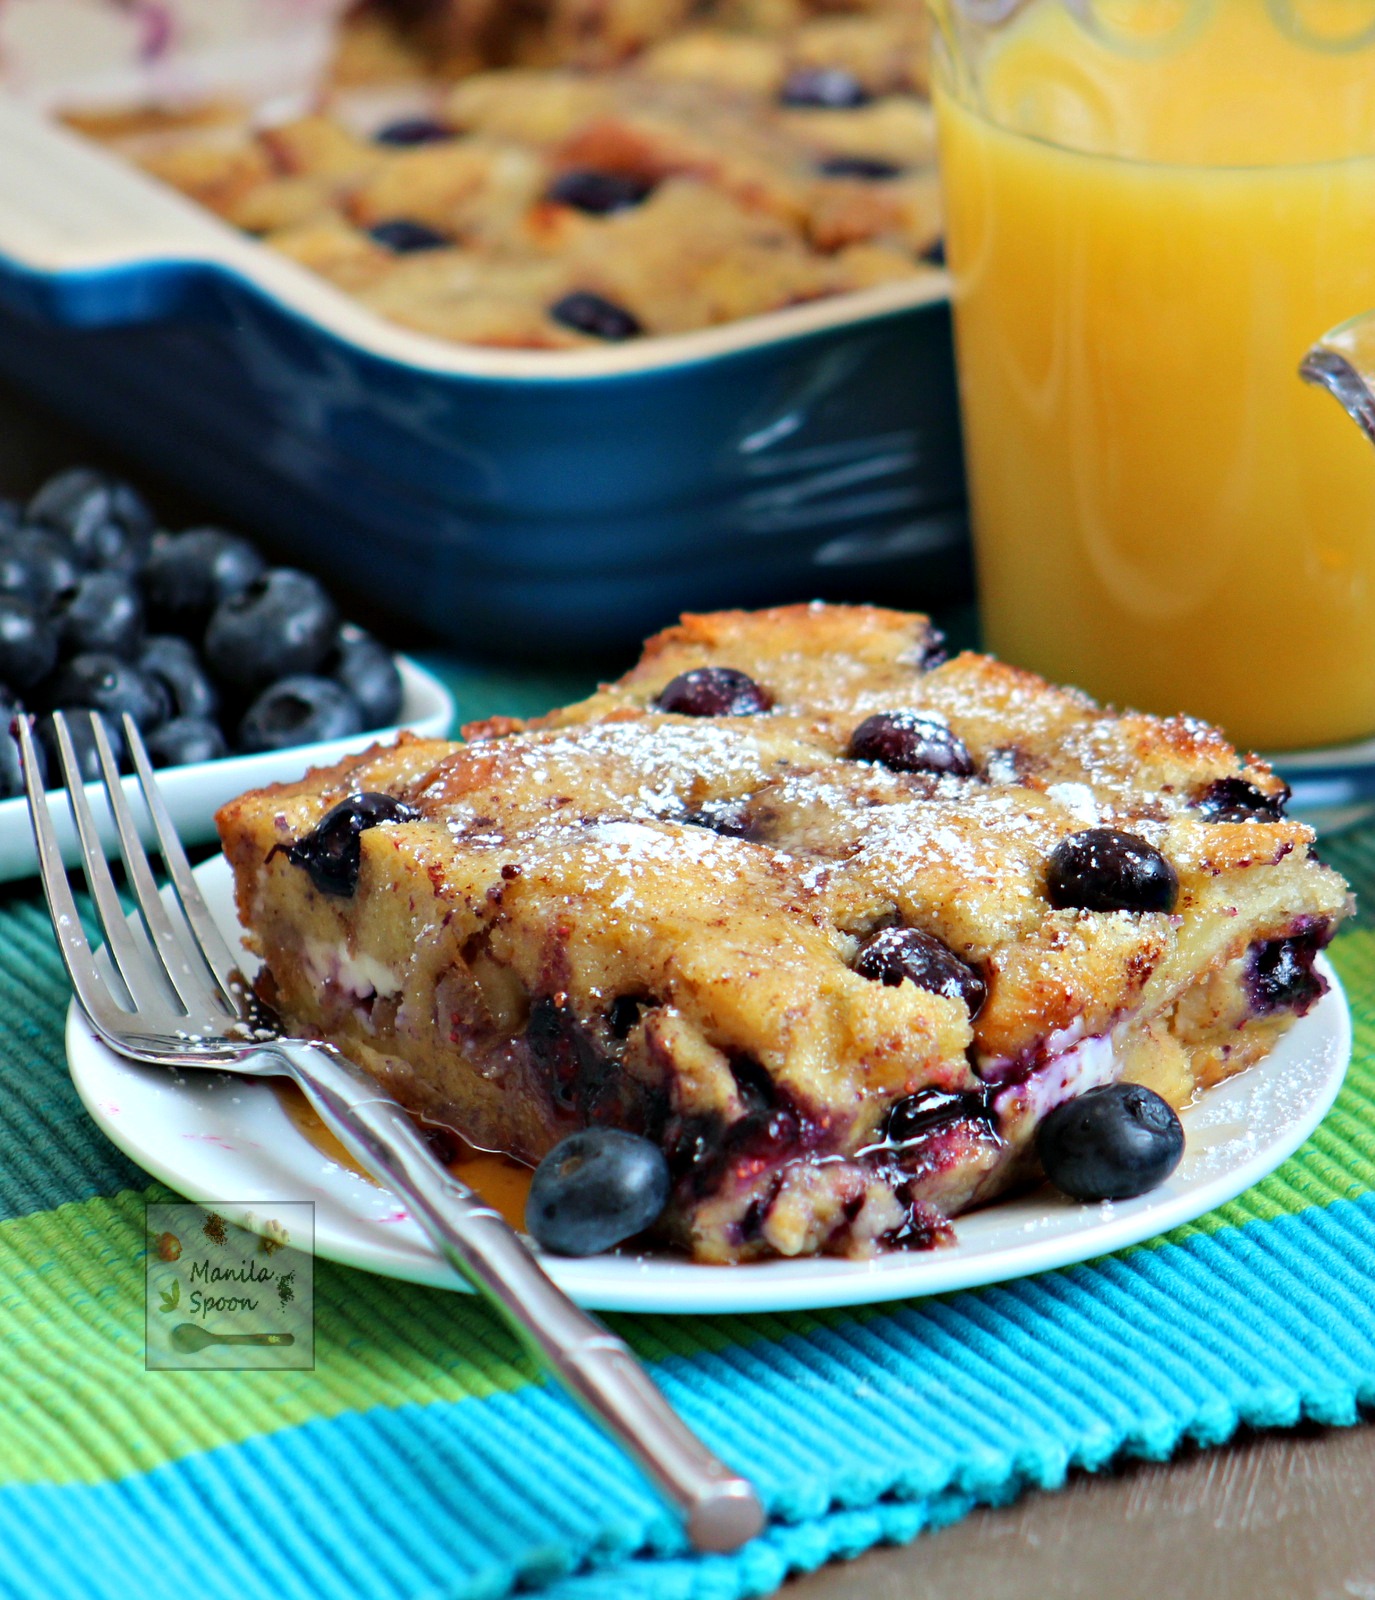 Juicy berries, crunchy walnuts plus yummy cream cheese and warmed up maple syrup make this a fantastic breakfast or brunch dish - Overnight Blueberry French Toast Casserole | manilaspoon.com